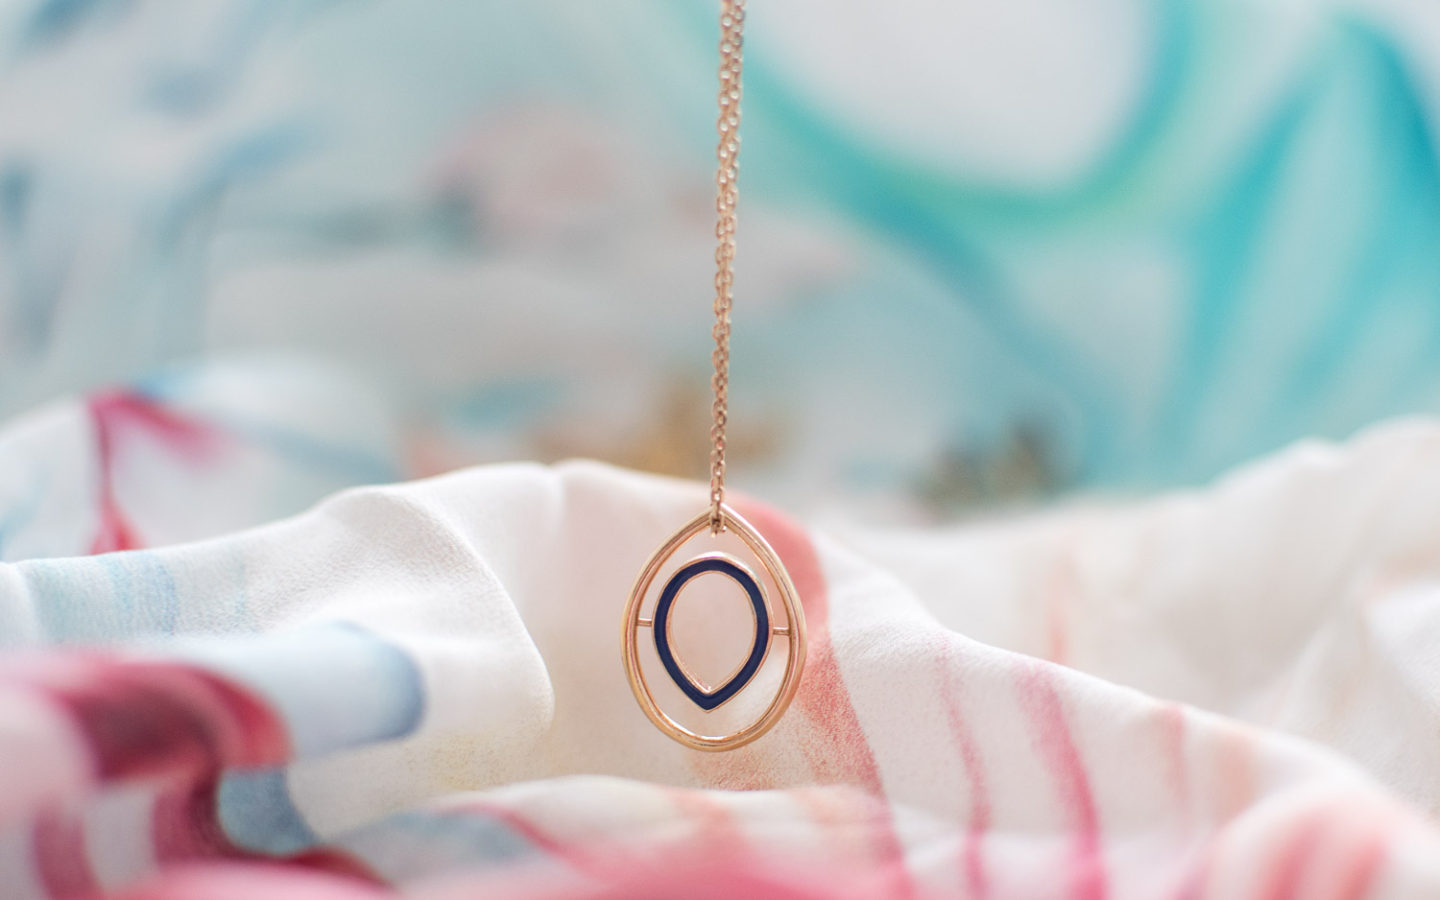 The apple pip necklace from ethical jewellery brand Little by Little